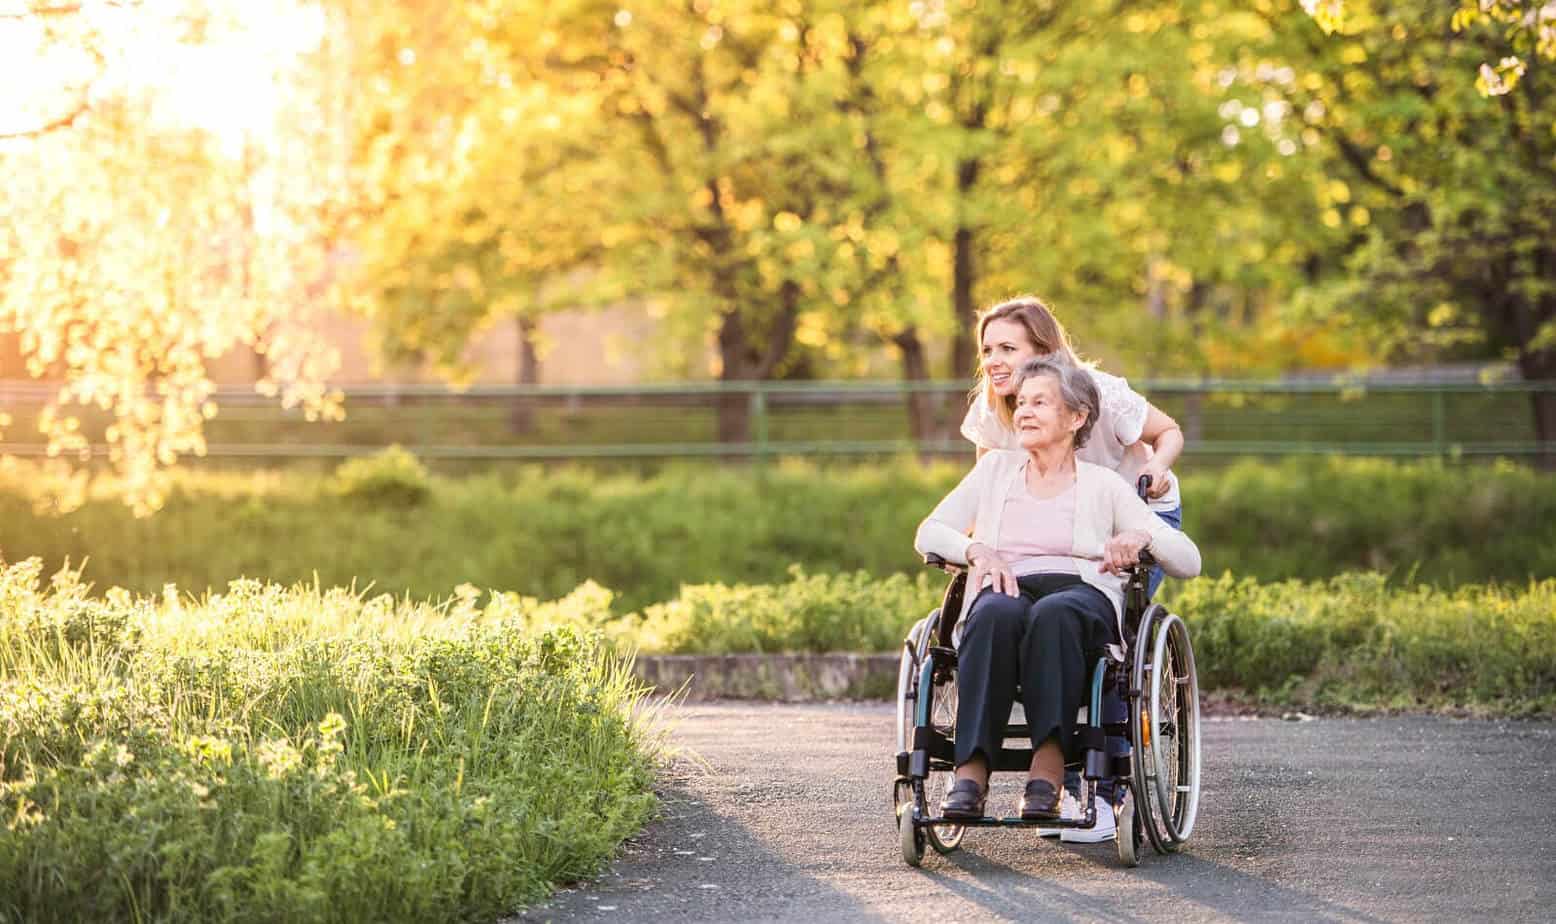 To benefit from a power wheelchair, you need to consider the tips on how to extend the life of your power wheelchair battery. That way, you will have an excellent working wheelchair.